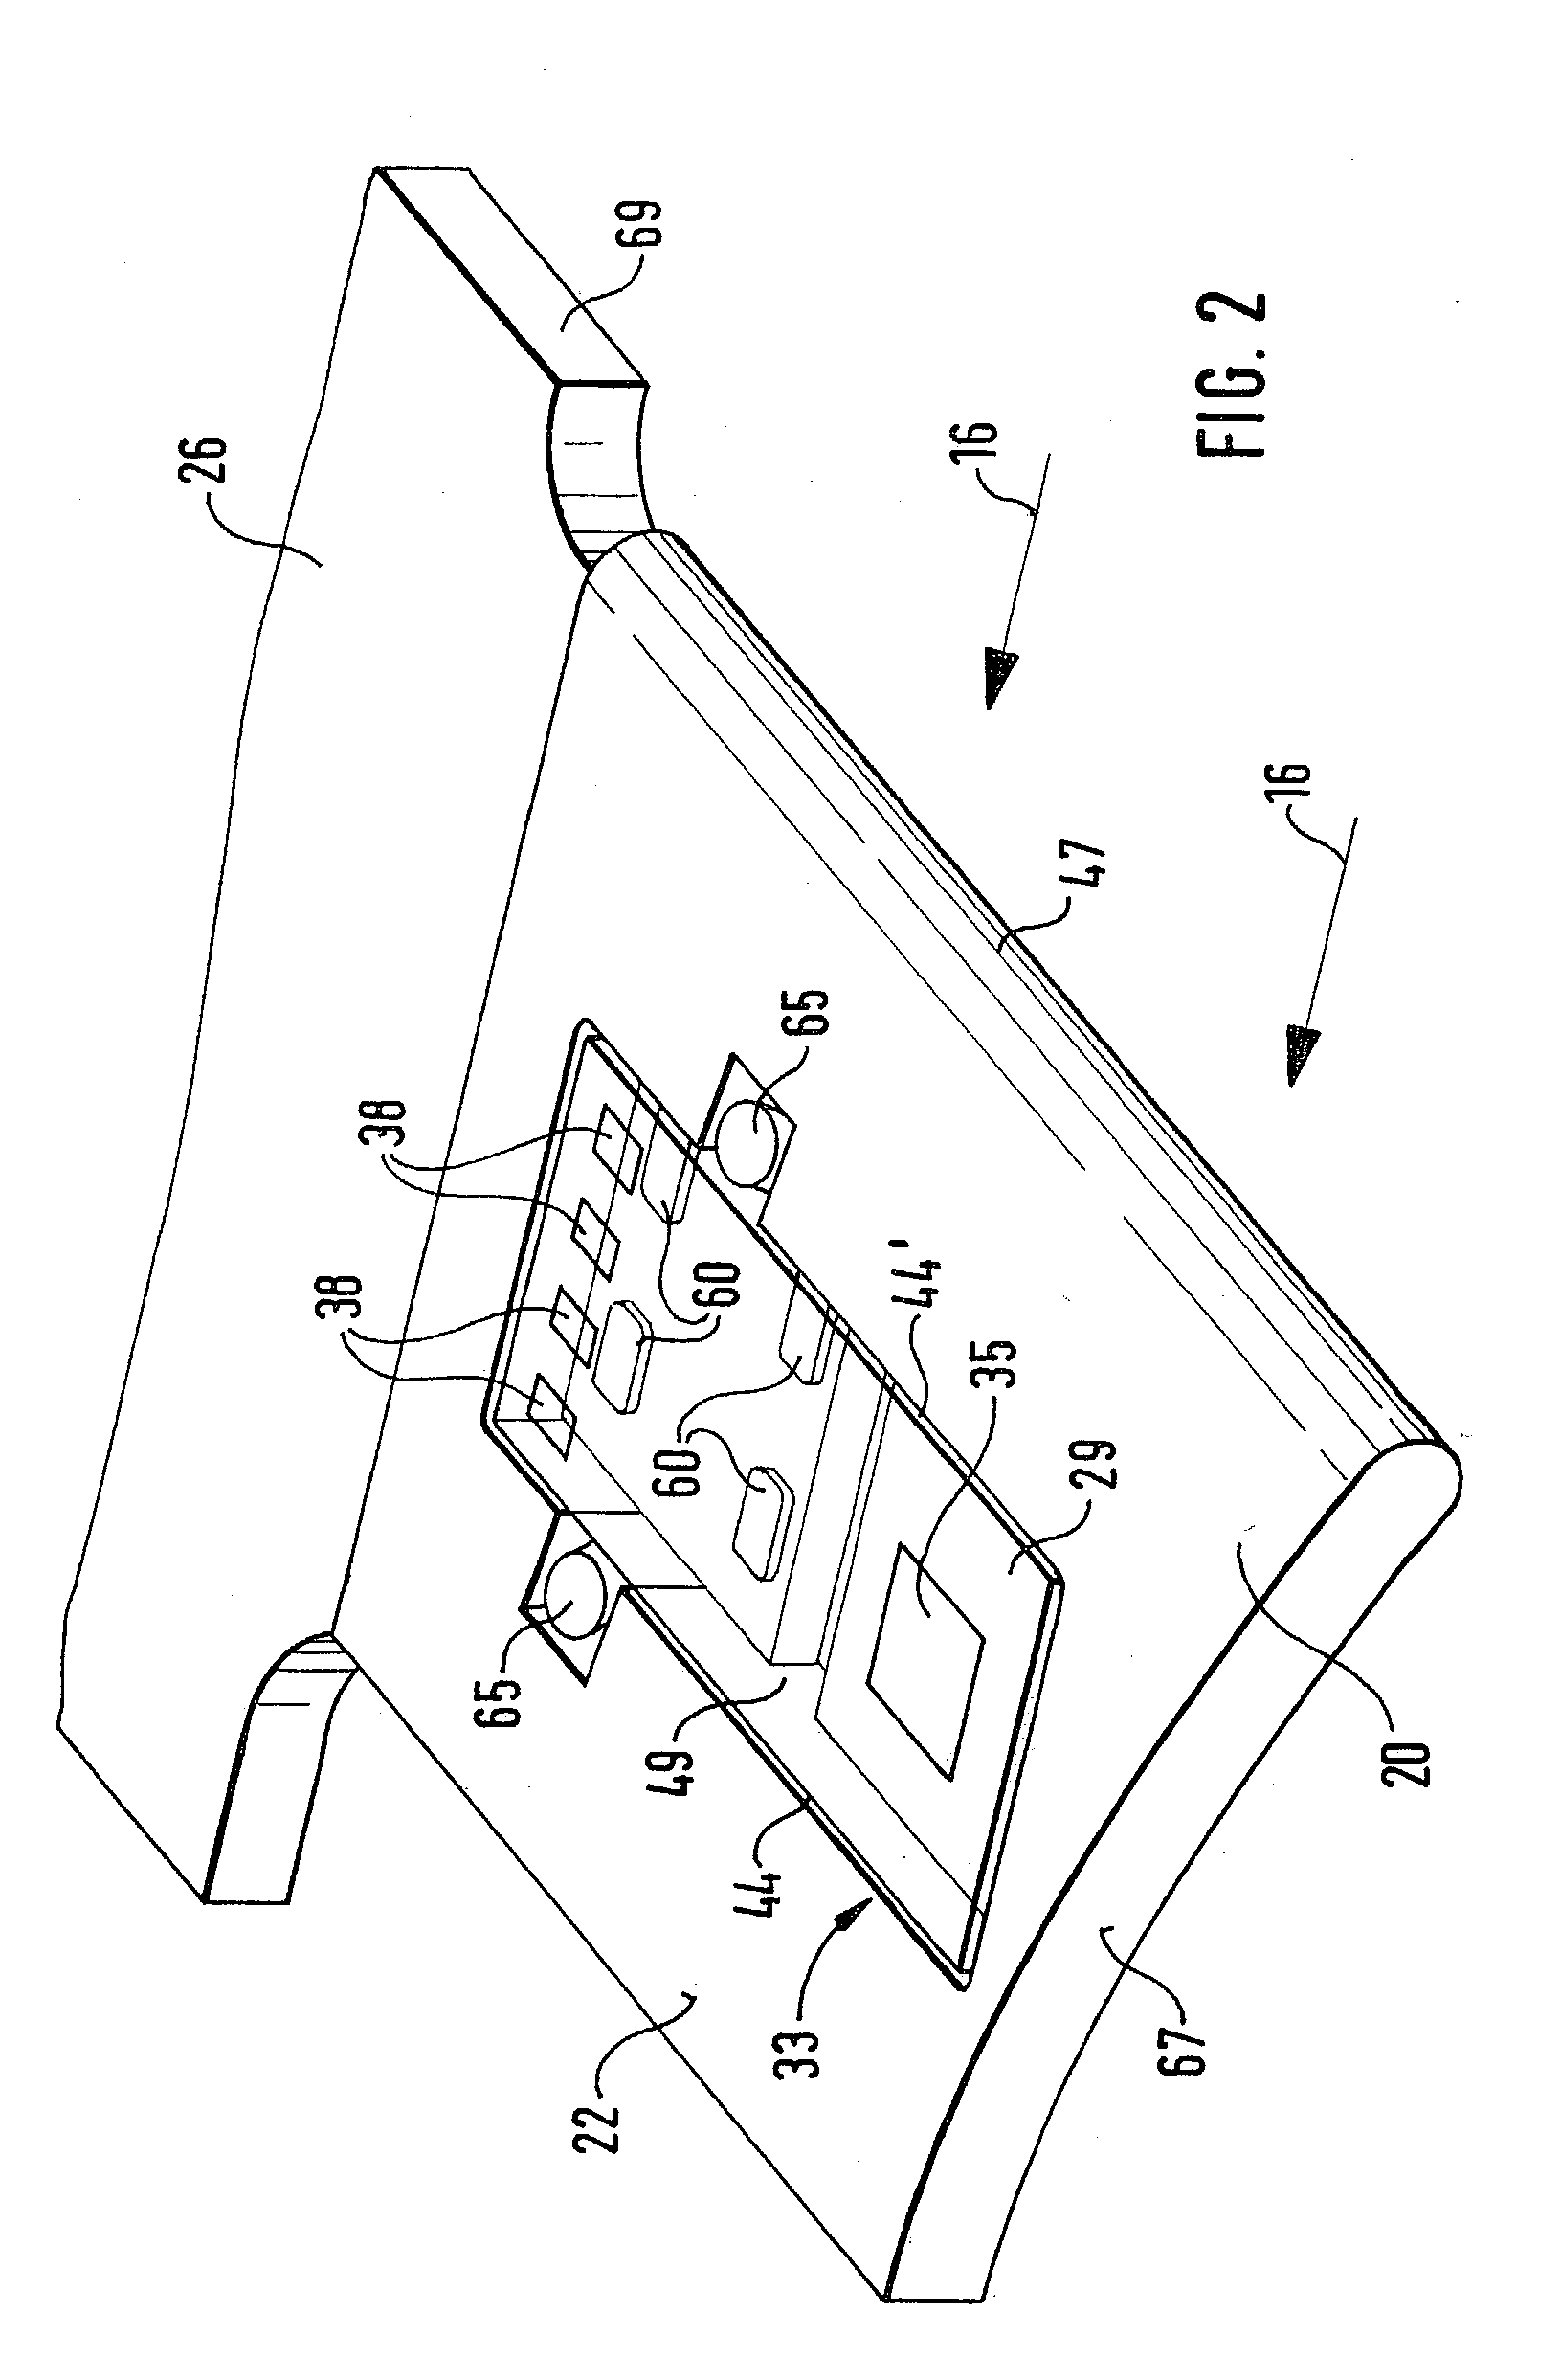 Device for determining at least one parameter of a flowing medium